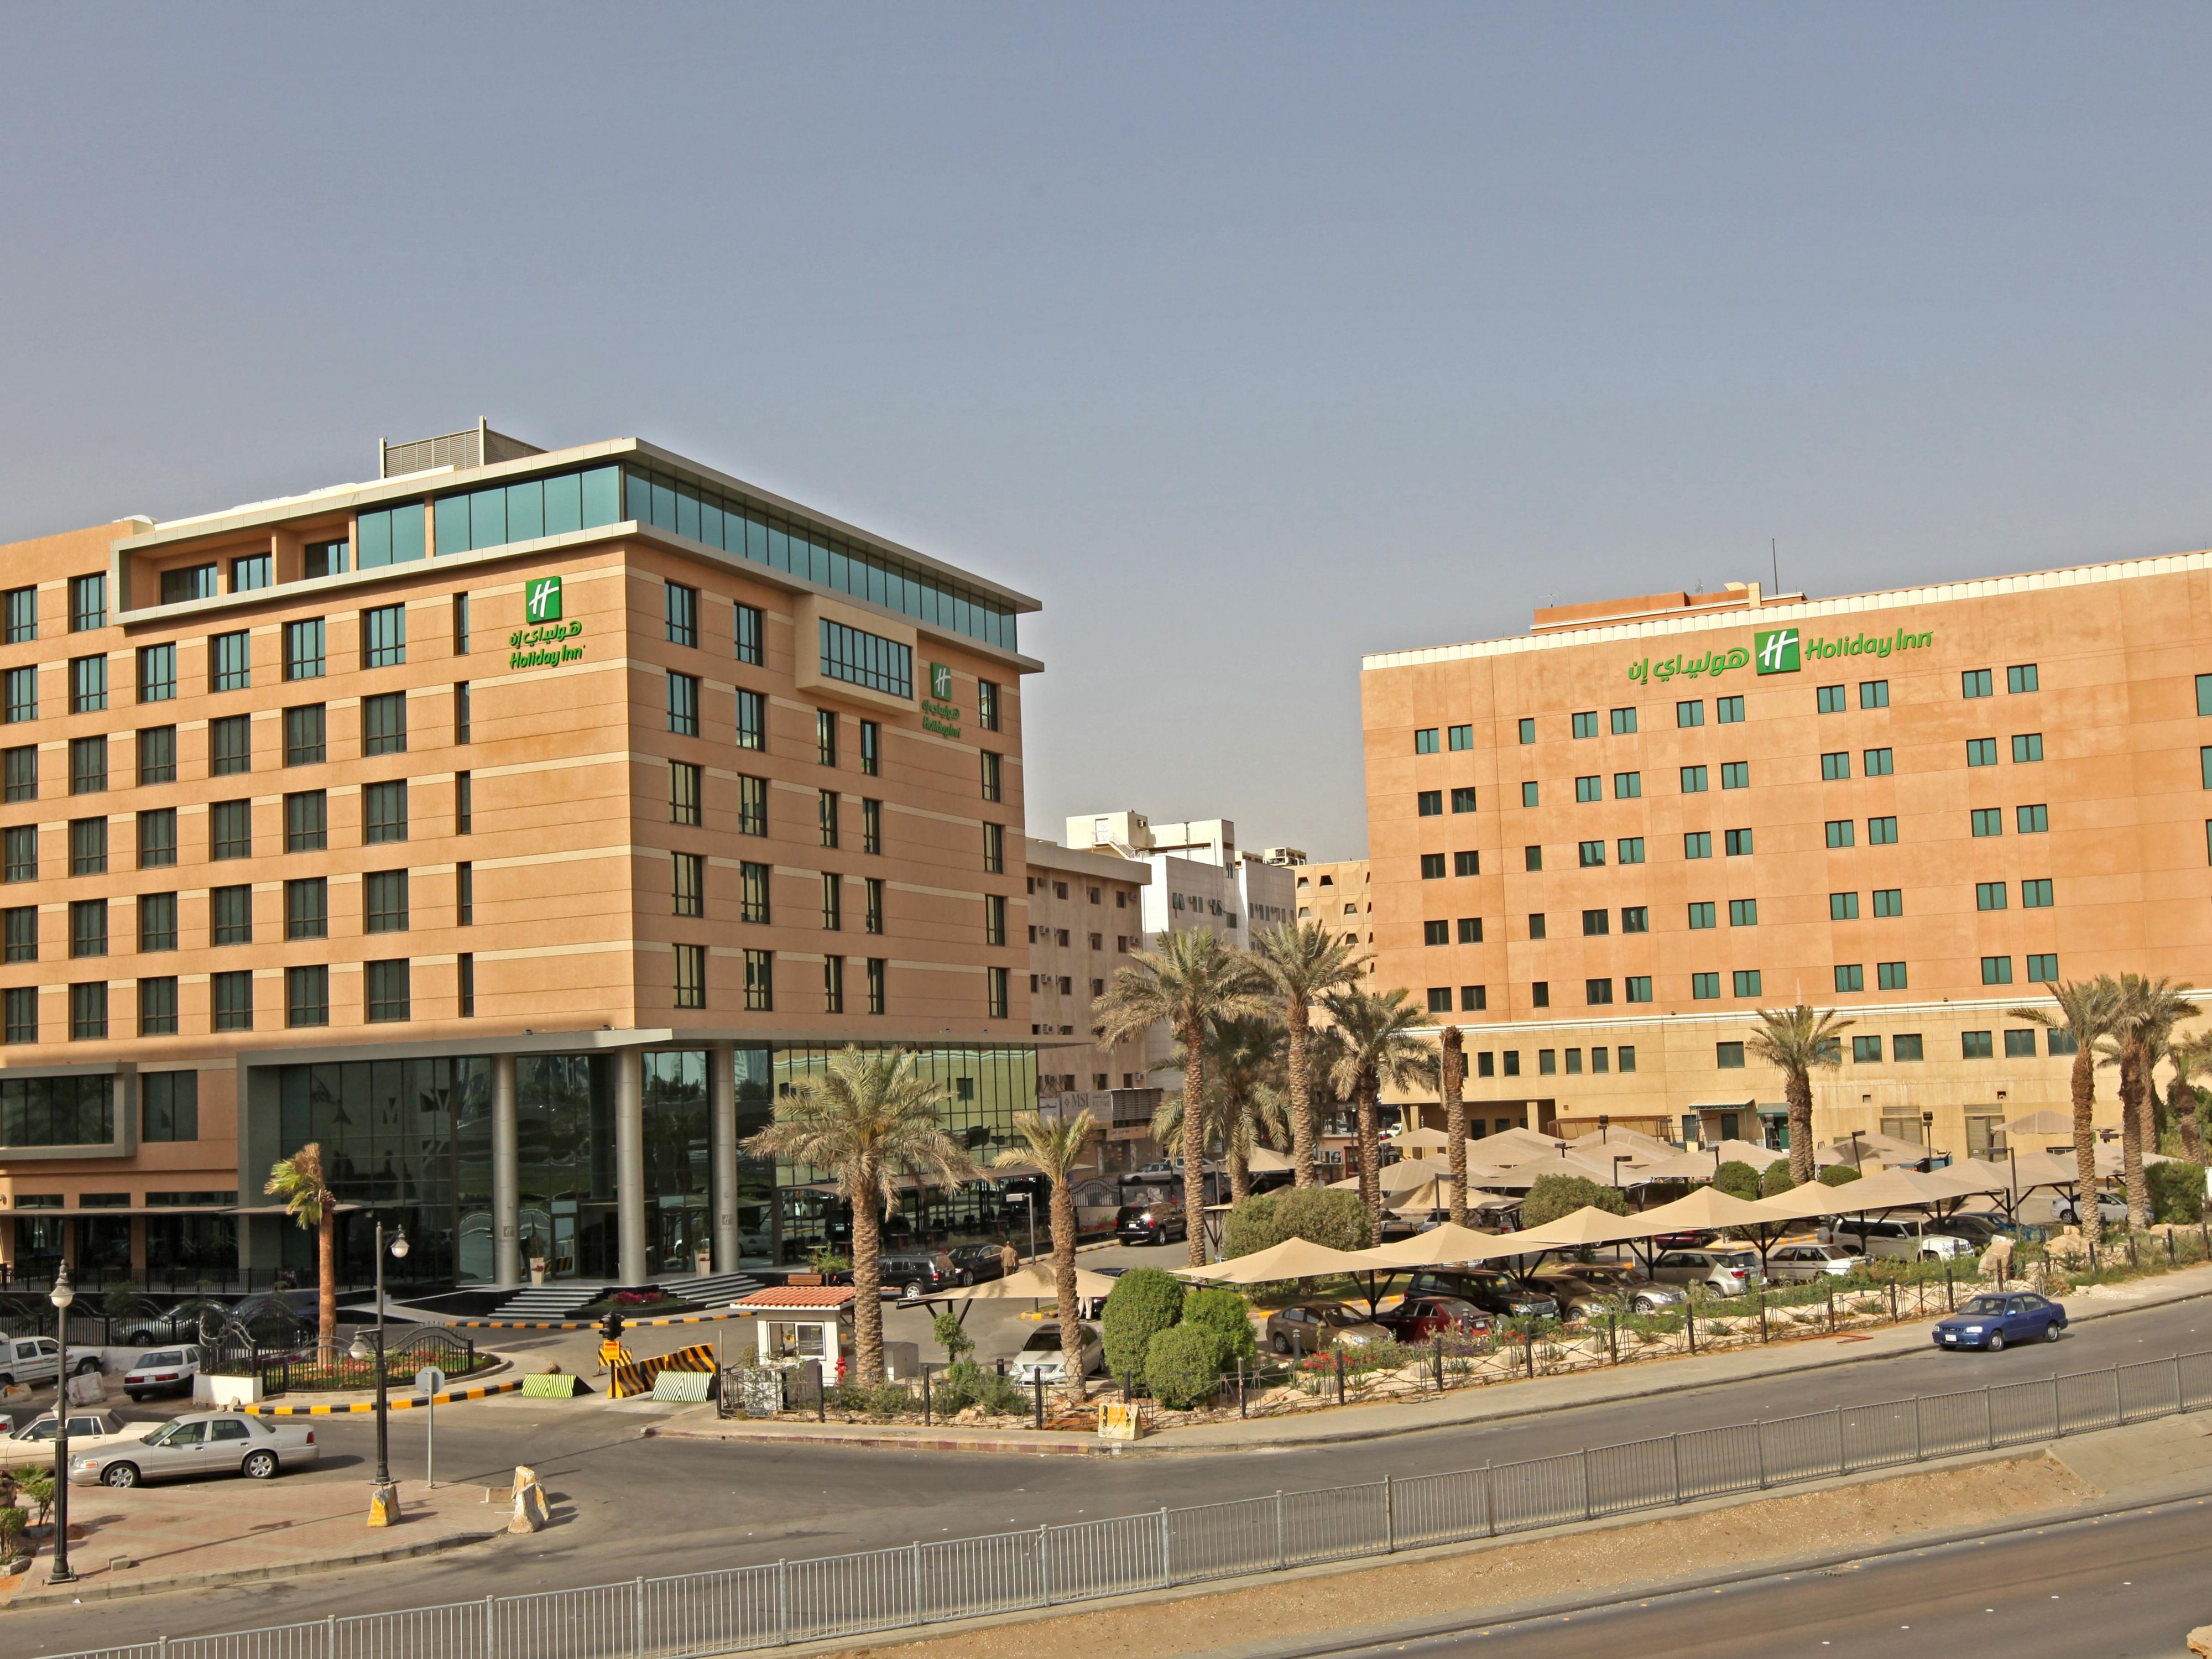 Hotel is centrally located, close to major corporate companies, diplomatic quarter and ministries in Riyadh